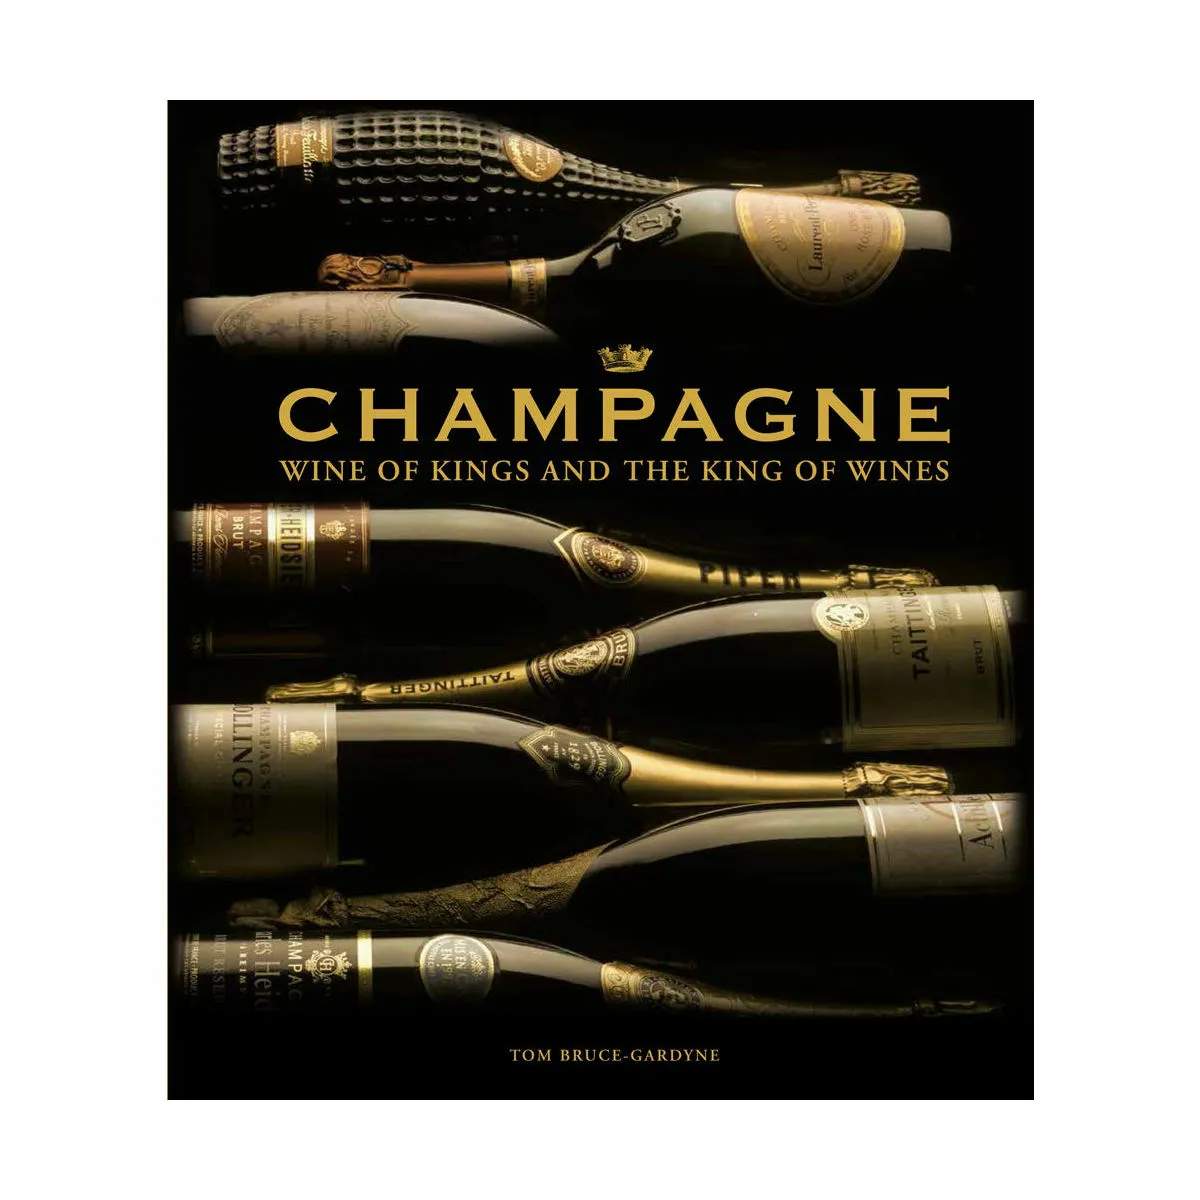 Champagne – Wine of Kings and the King of Wines øvrige bøger